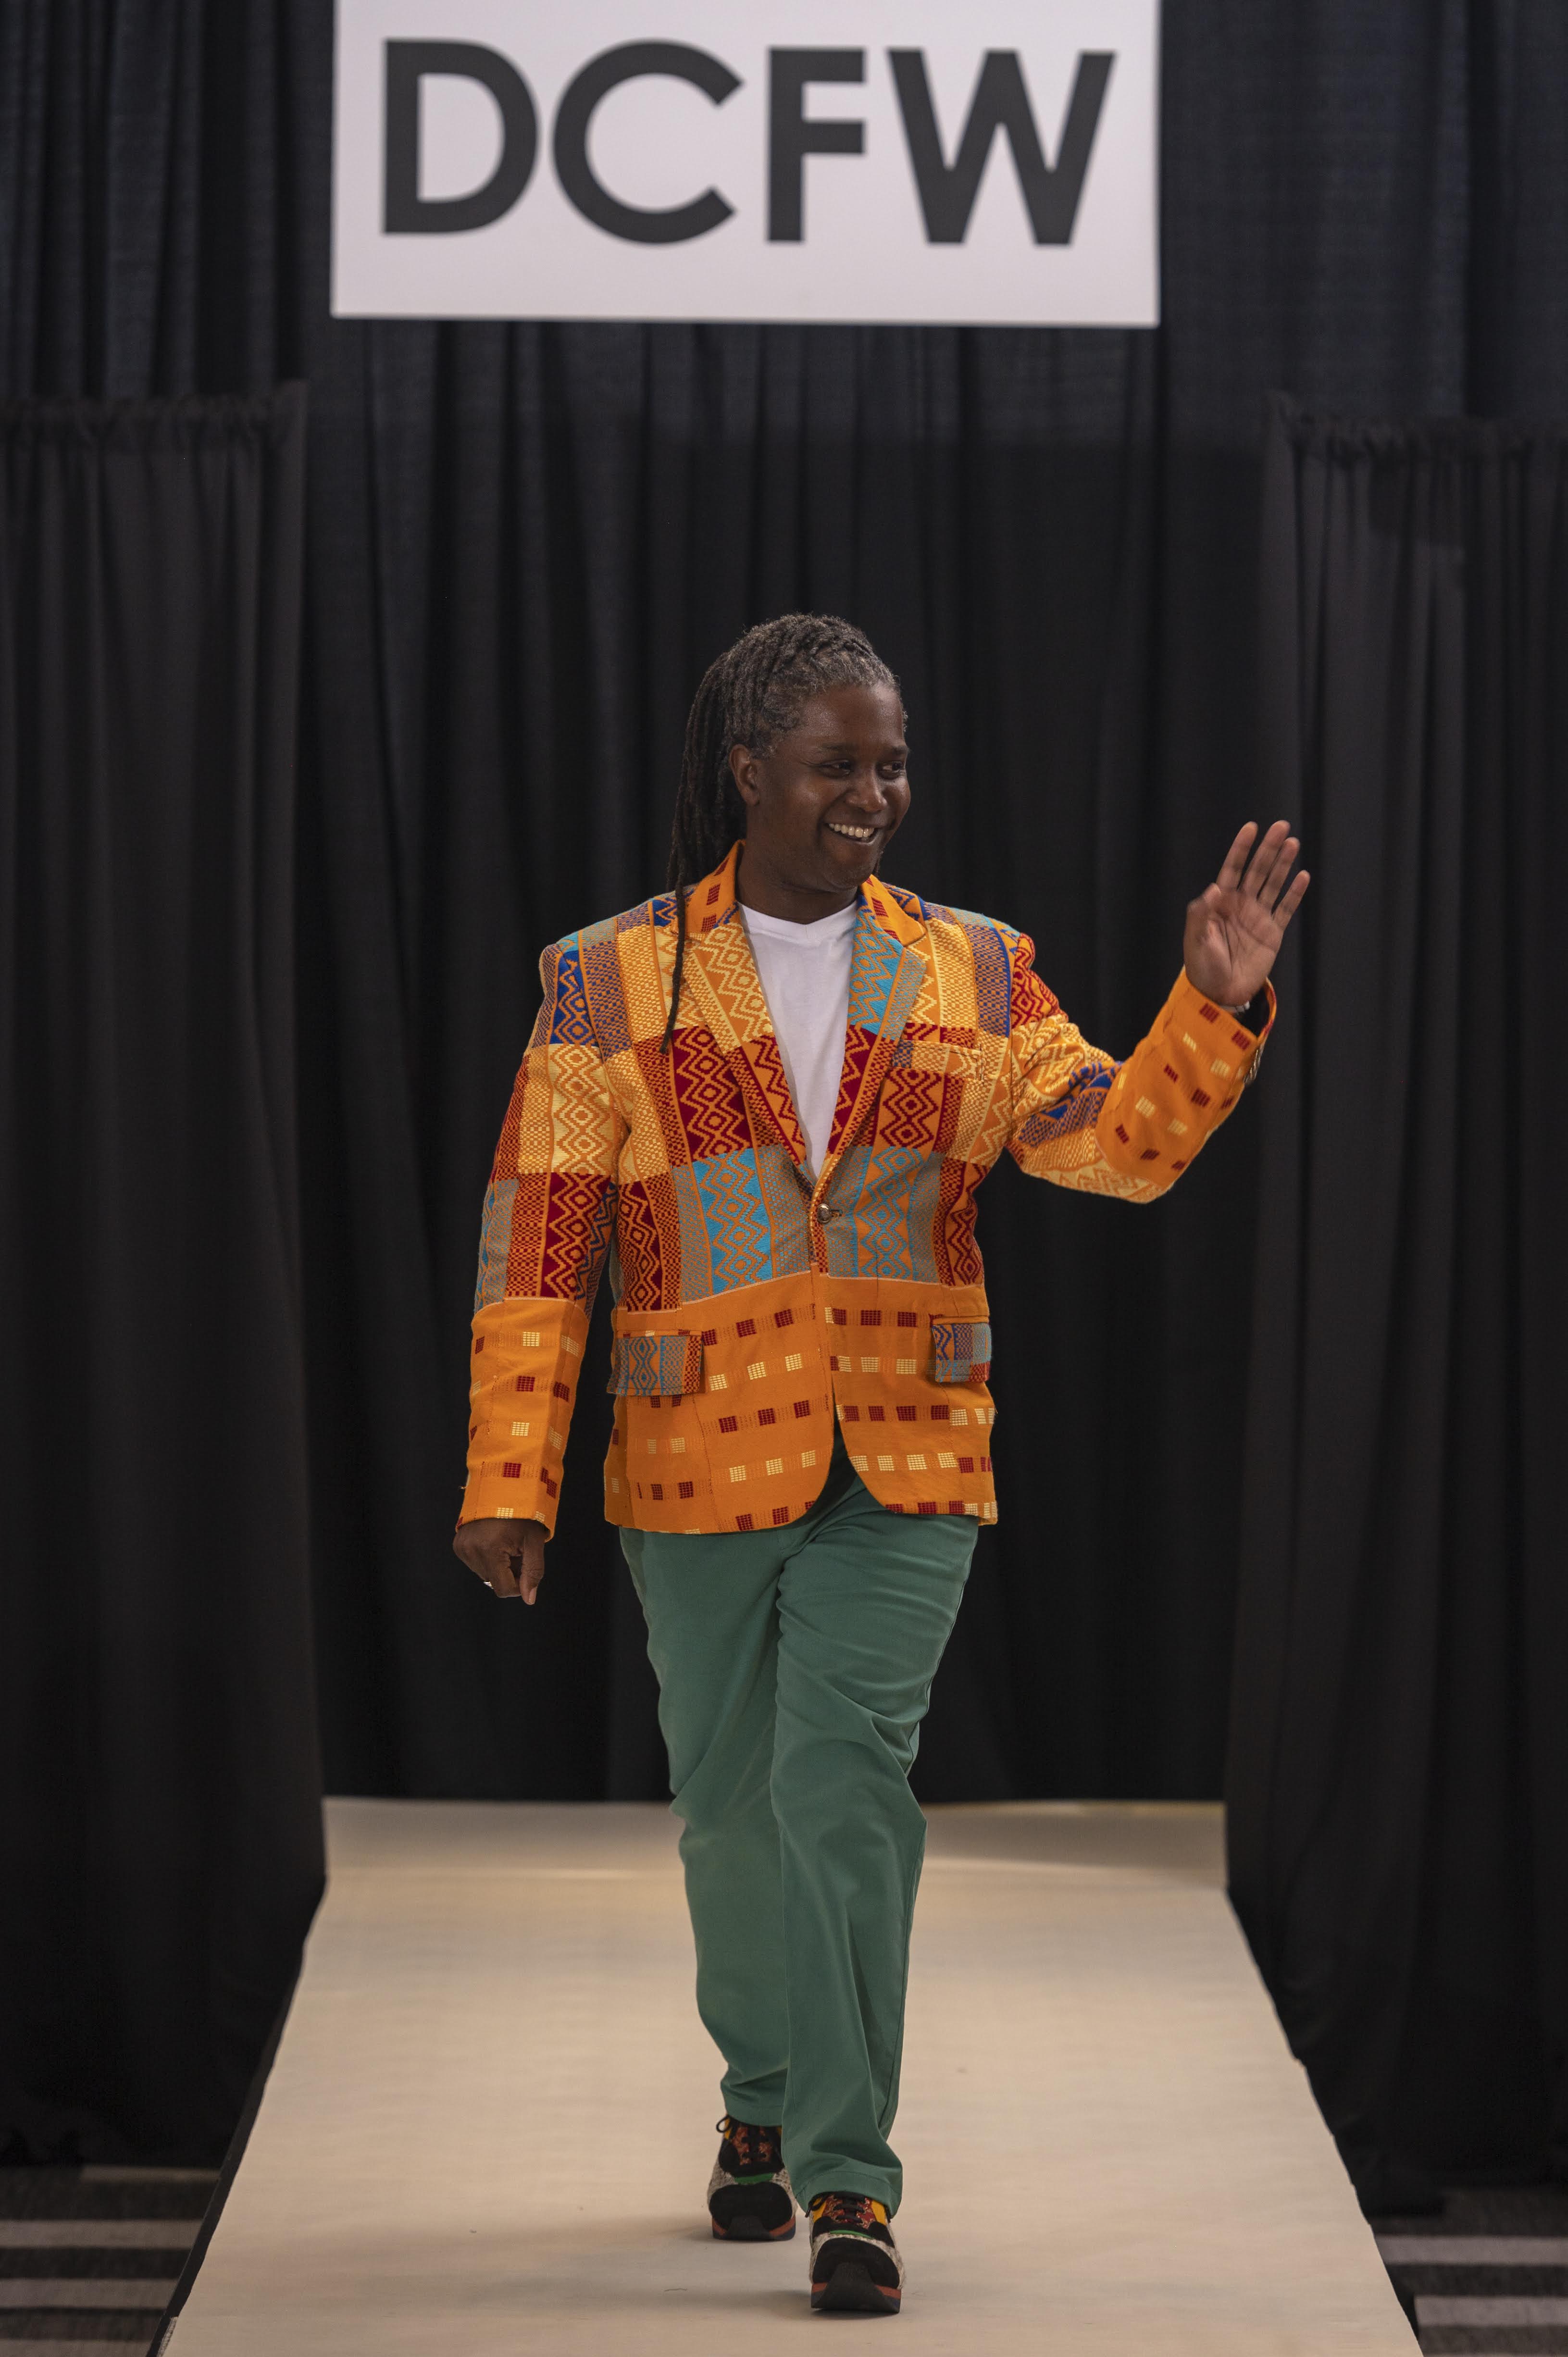 Gattis walks down a runway smiling and waving. He wears a bright orange patterned blazer with a white undershirt and green trousers. Behind him are black curtains and a large sign that says "DCFW."